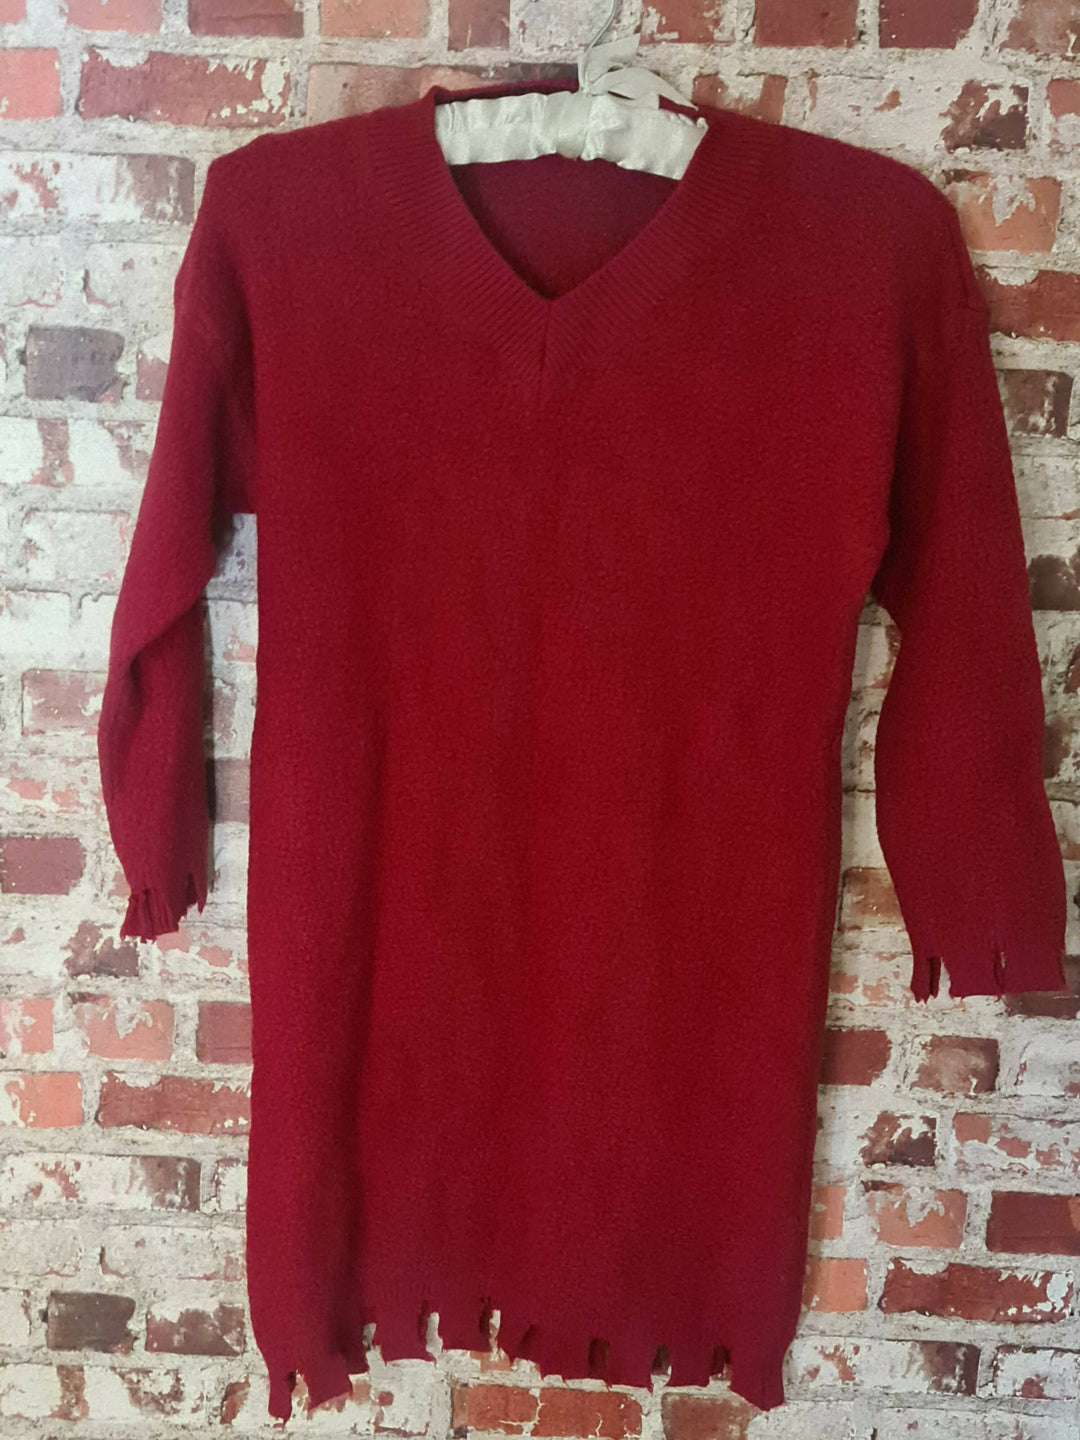 Image of Pre-Loved 3/4 Sleeve Jersey